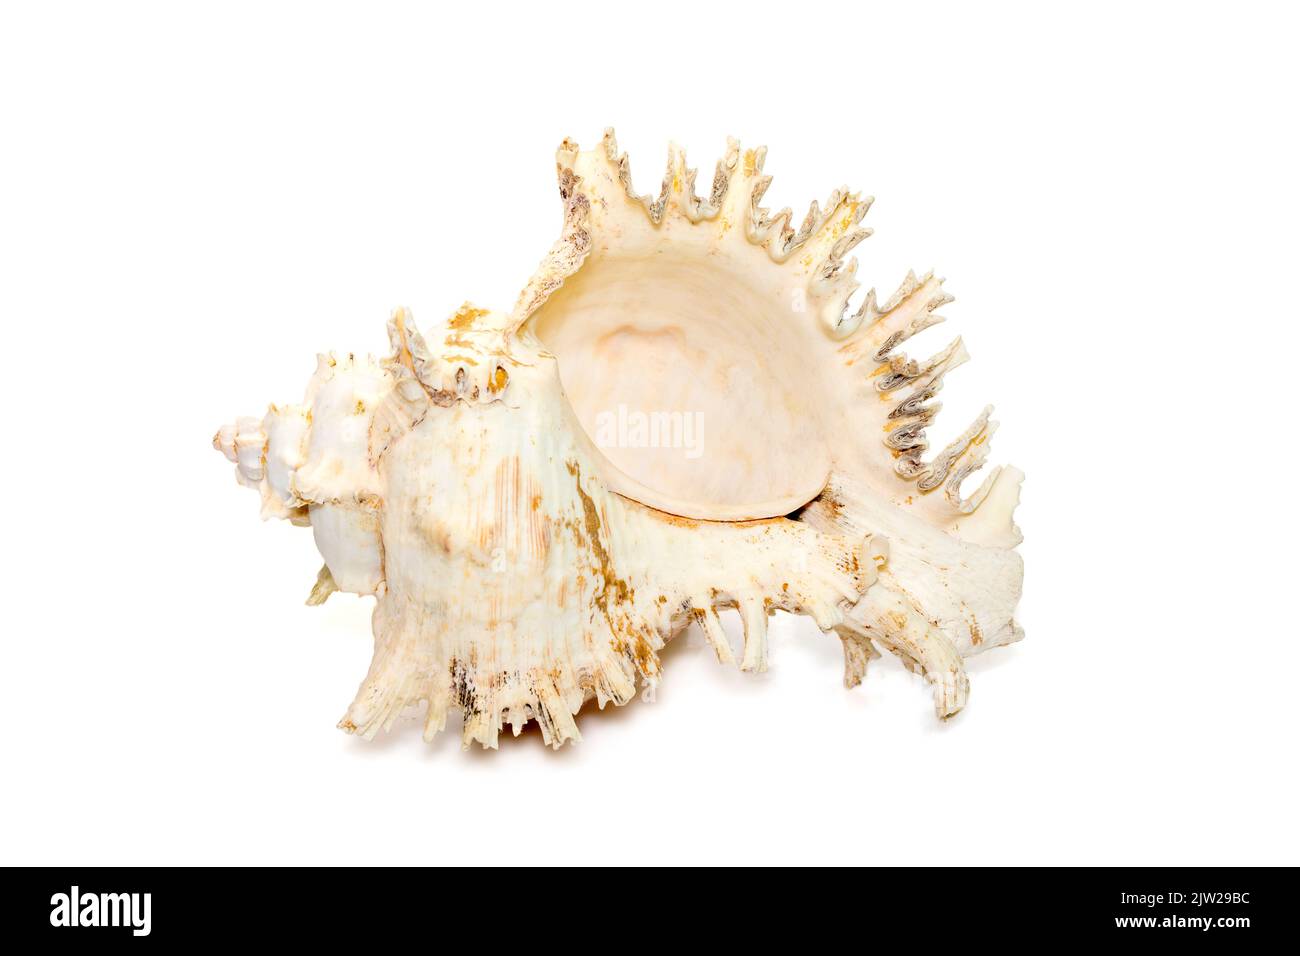 Image of chicore us ramosus, common name the ramose murex or branched murex, is a species of predatory sea snail, a marine gastropod mollusk in the fa Stock Photo